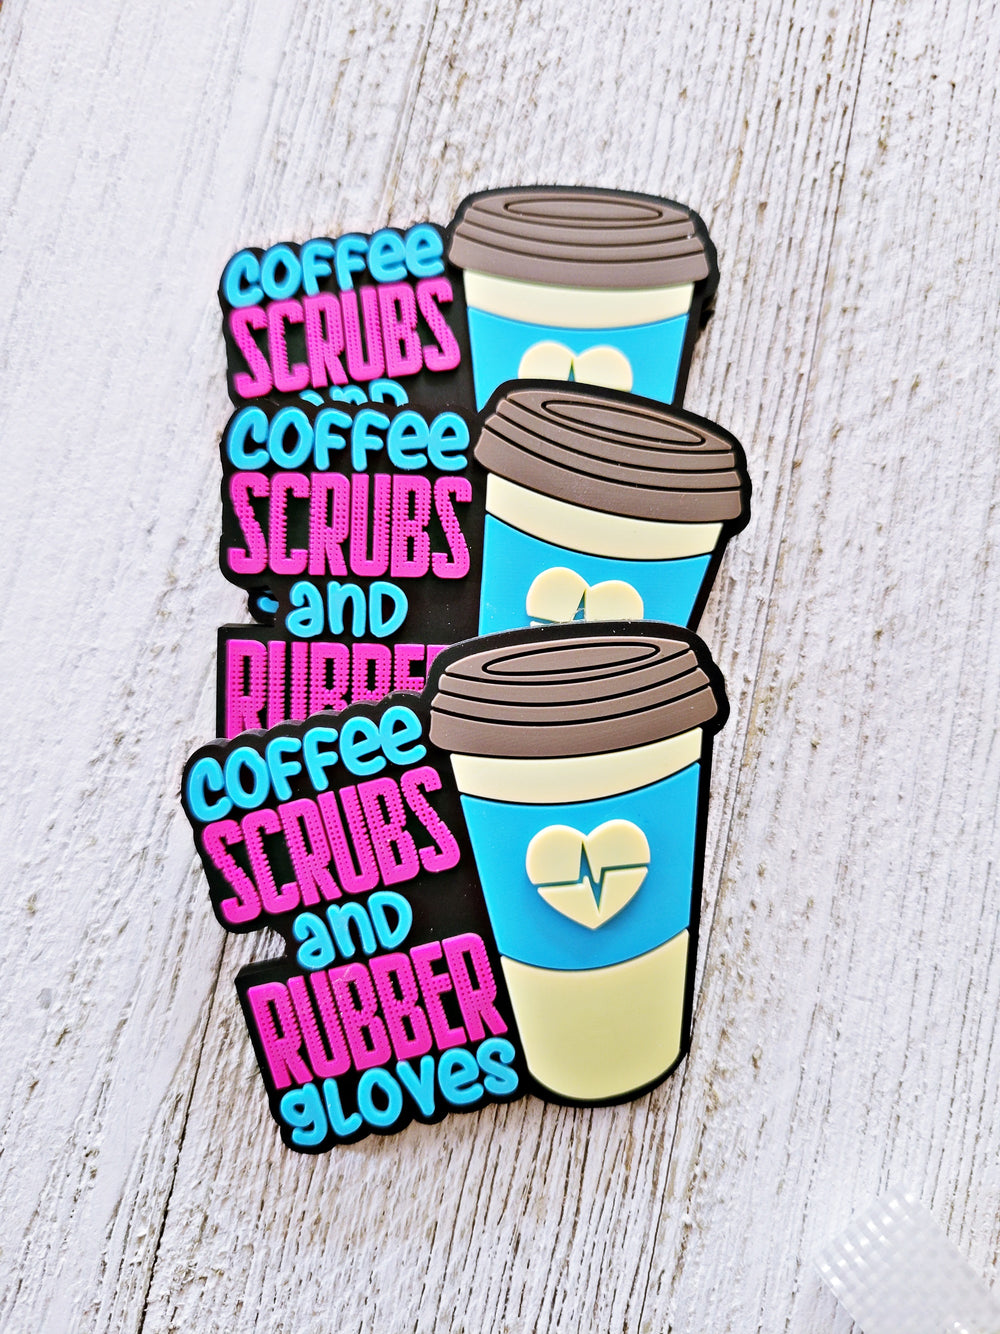 Cup of Coffee Scrubs & Rubber badge